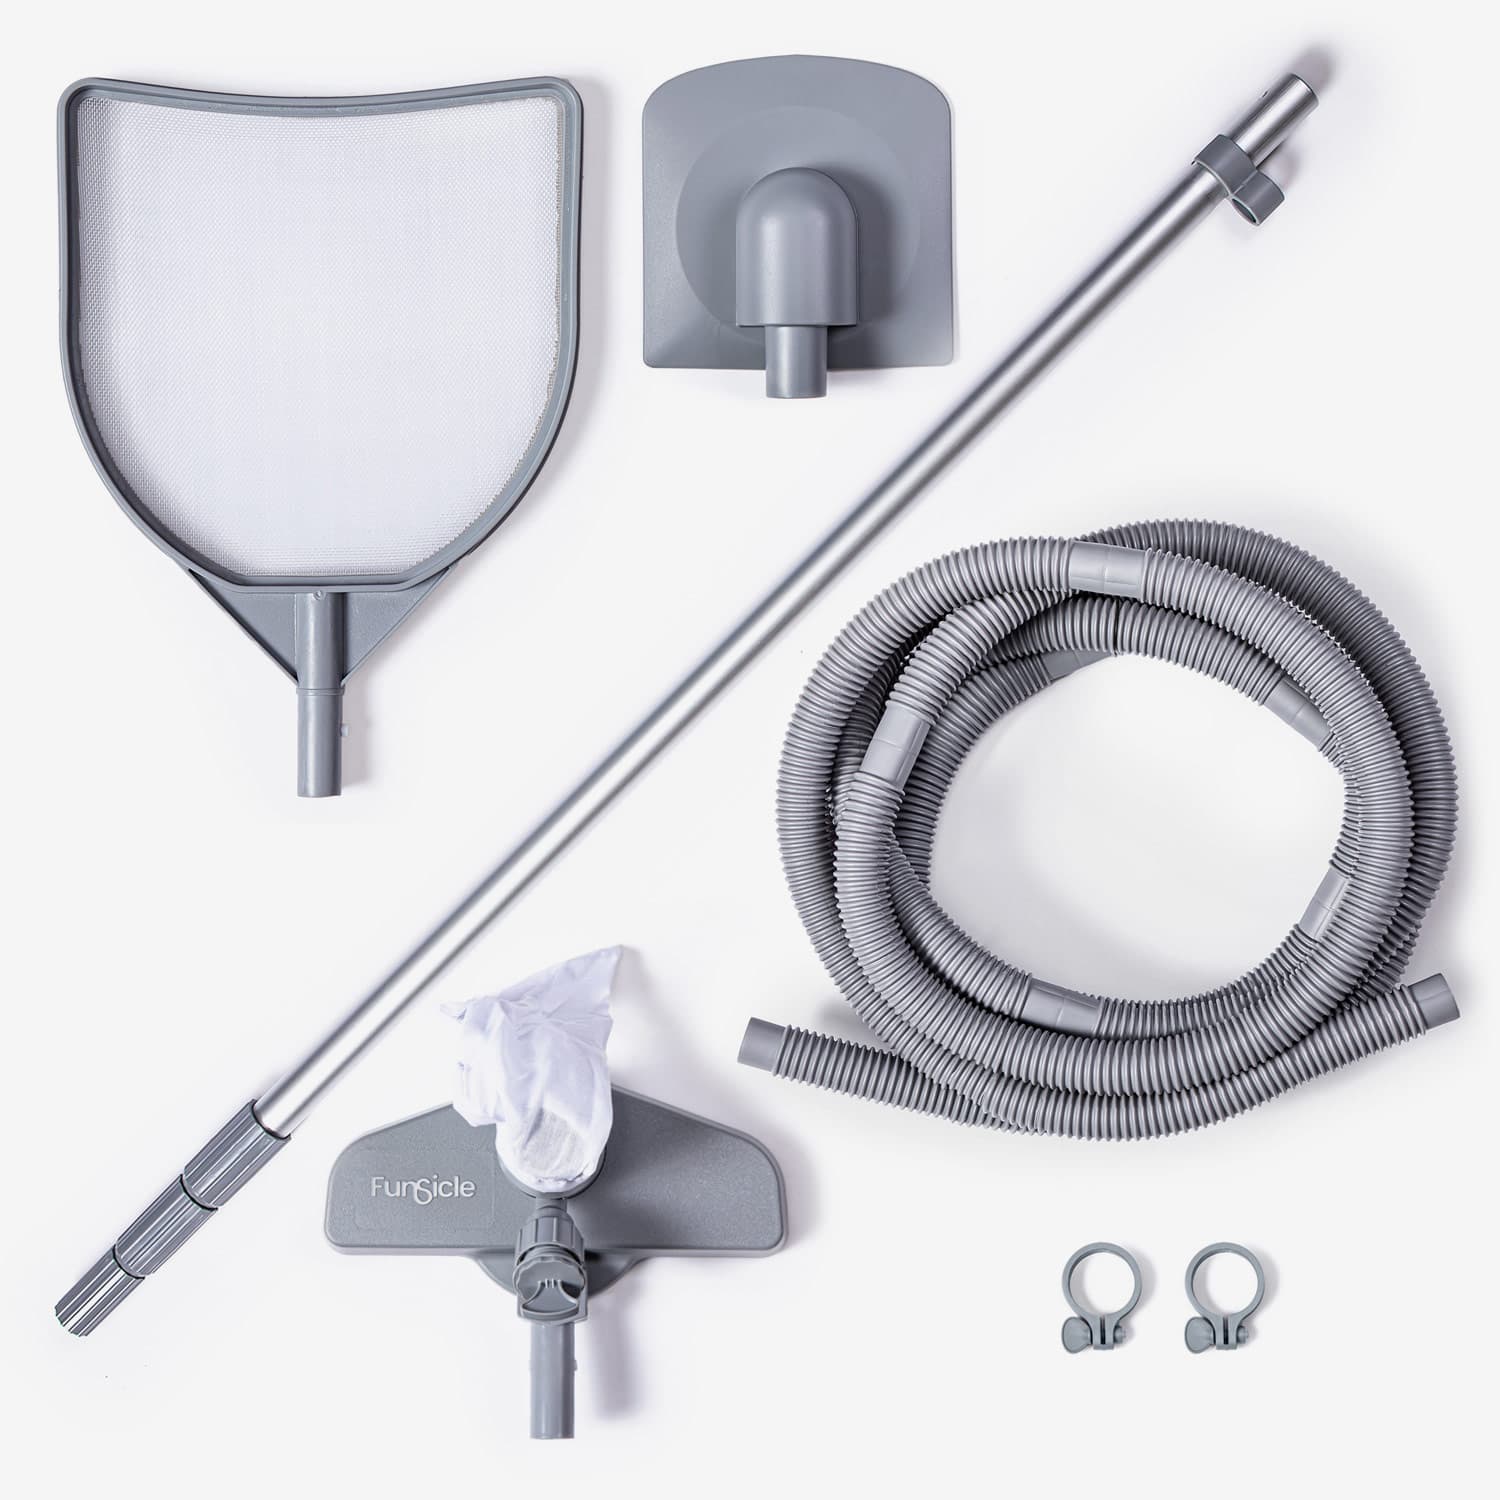 Funsicle Deluxe Maintenance Kit cool gray color